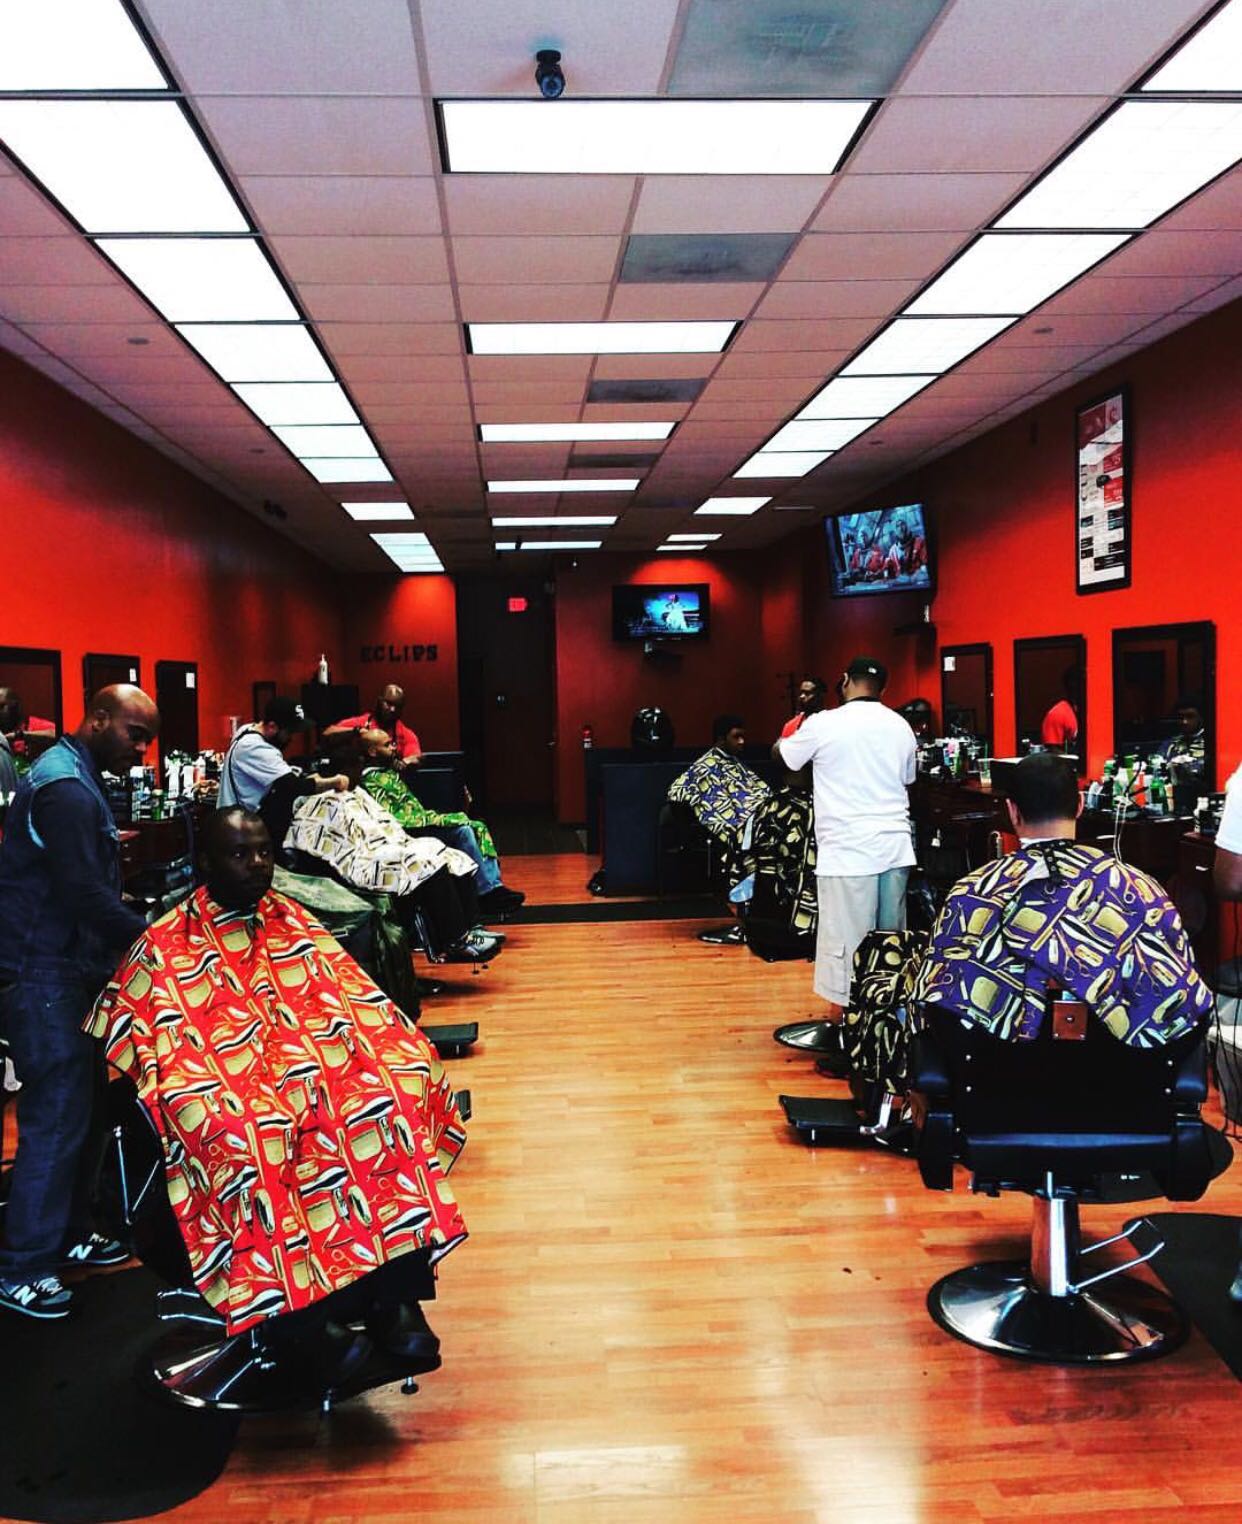 Eclips Barbershop and Salon